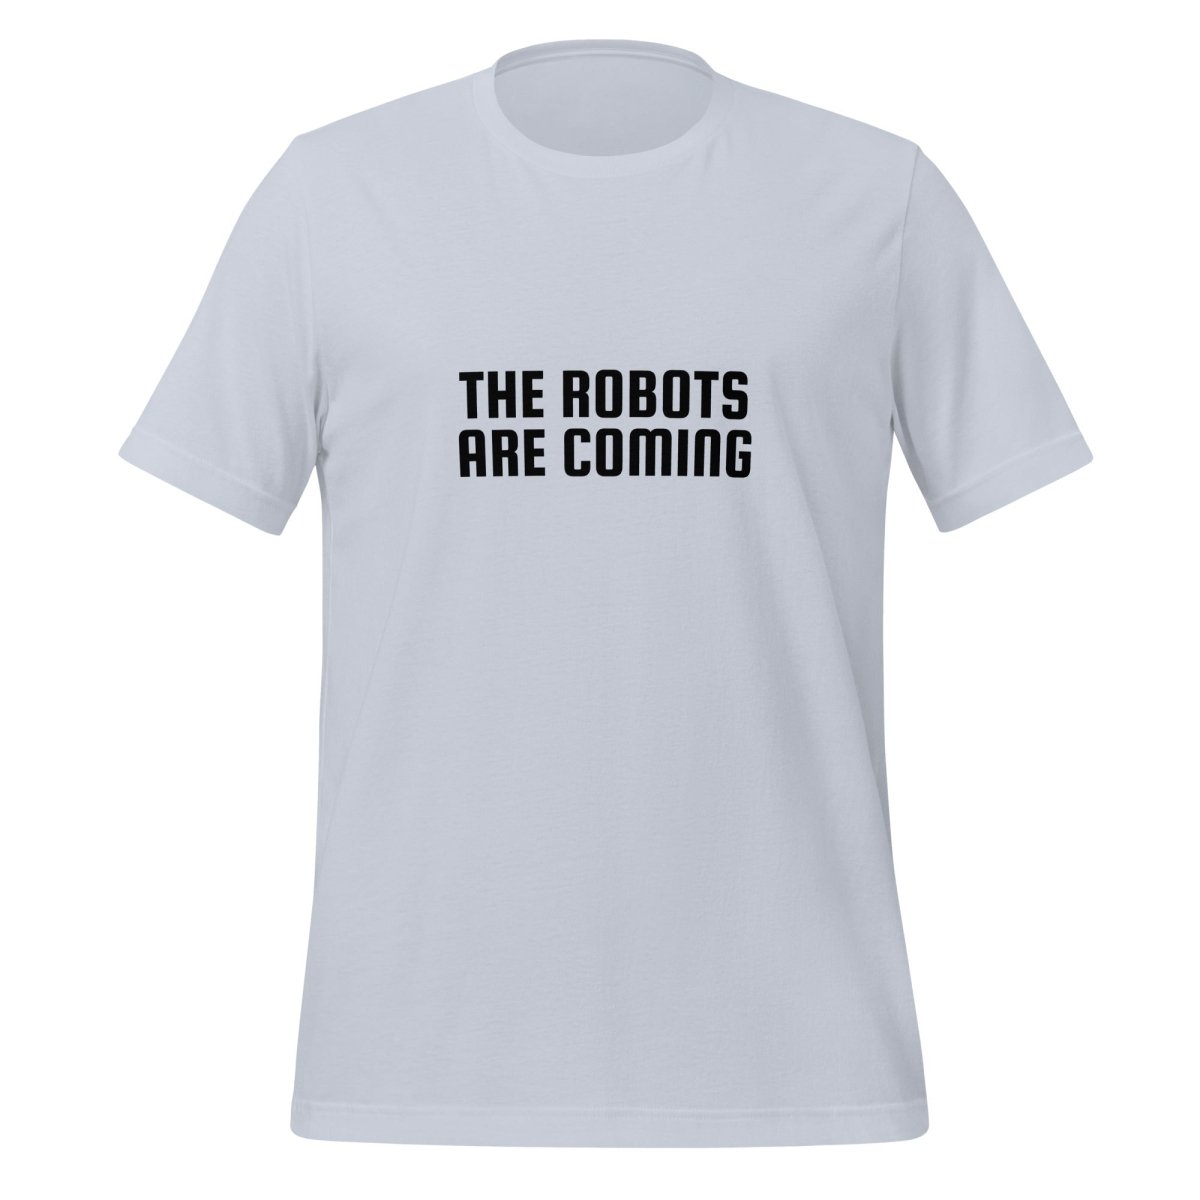 The Robots Are Coming in Black T - Shirt 2 (unisex) - Light Blue - AI Store